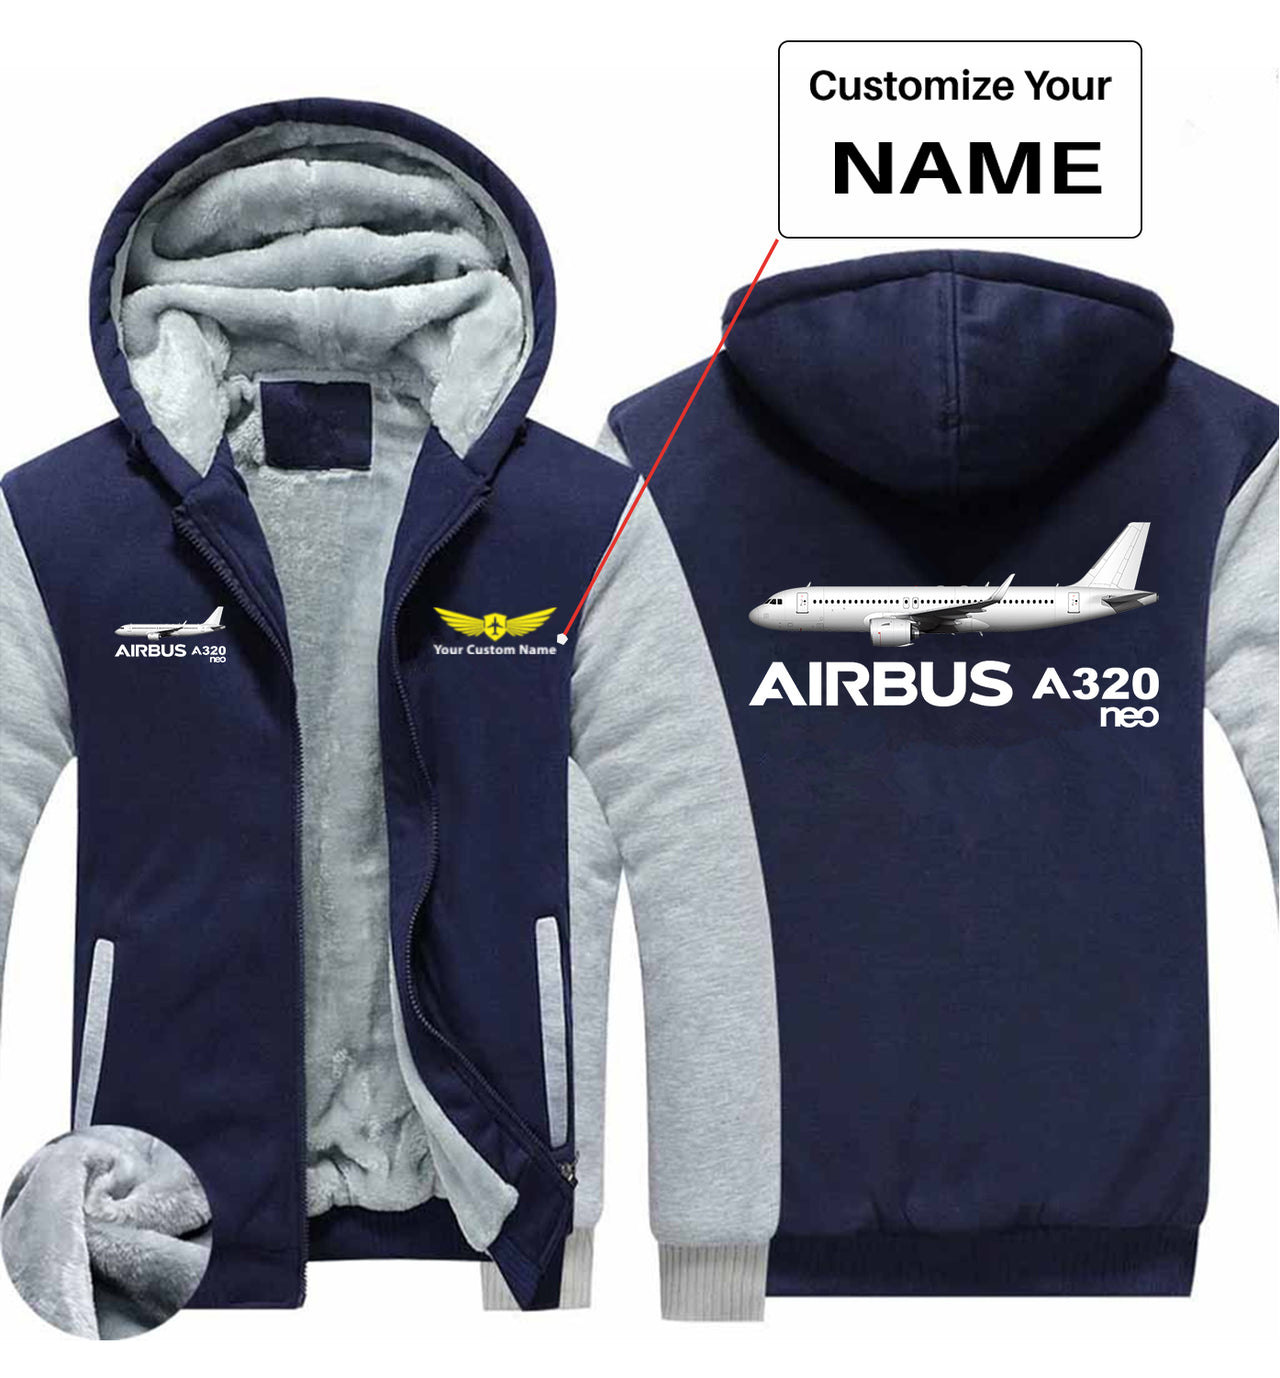 The Airbus A320Neo Designed Zipped Sweatshirts